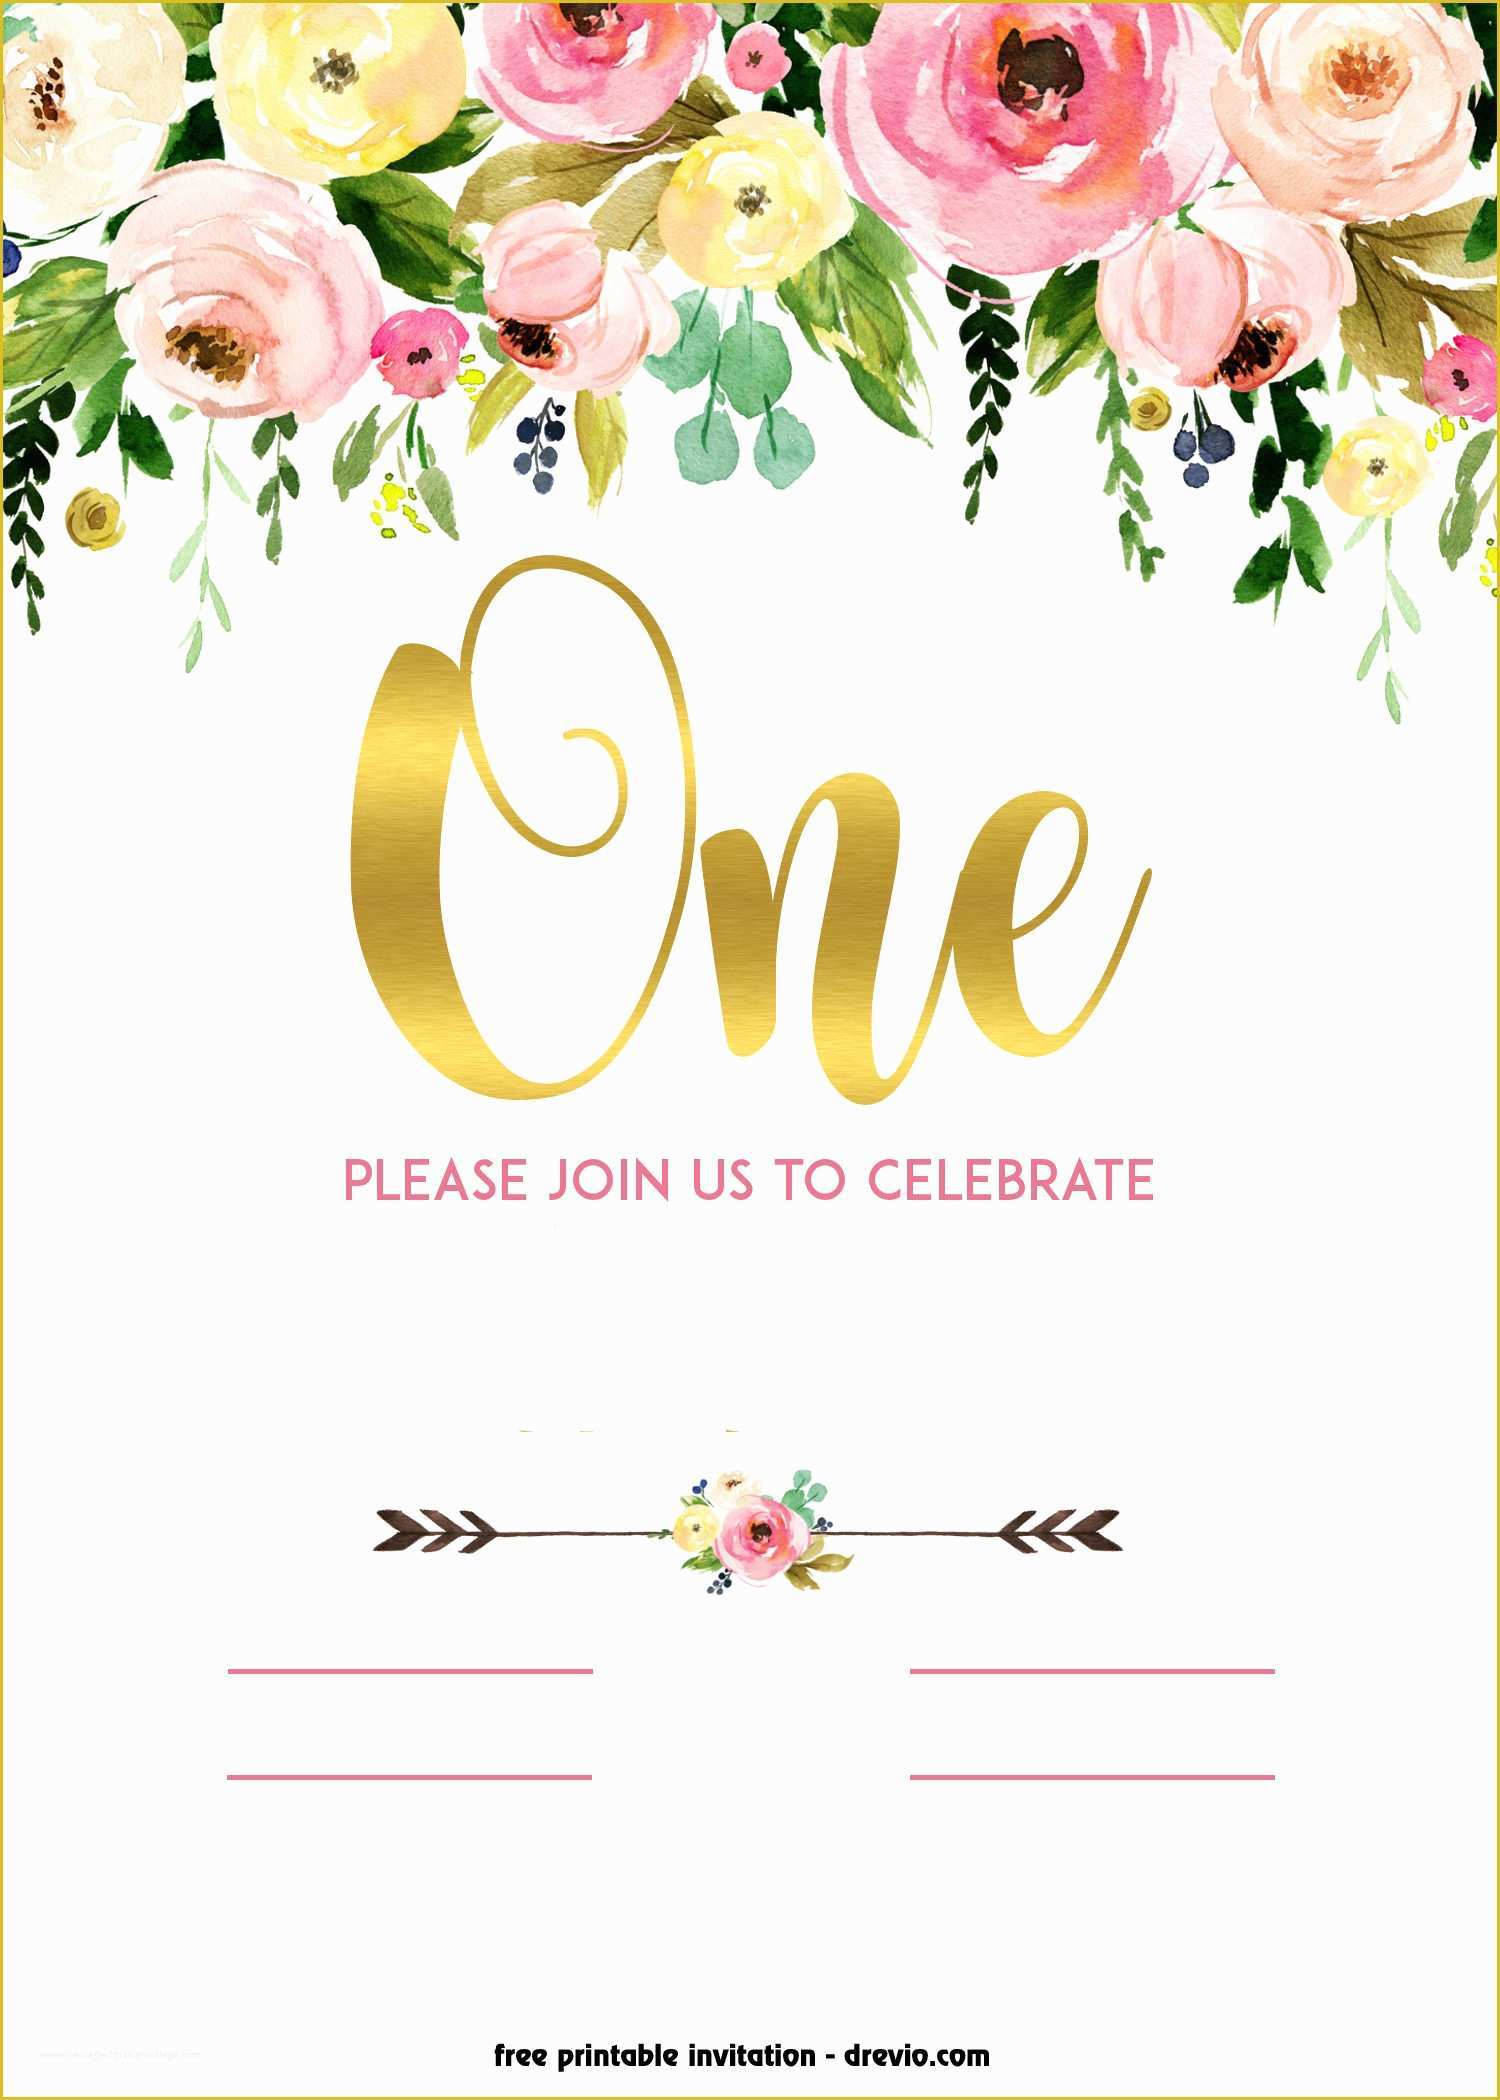 free-1st-birthday-invitation-pink-and-gold-glitter-template-1st